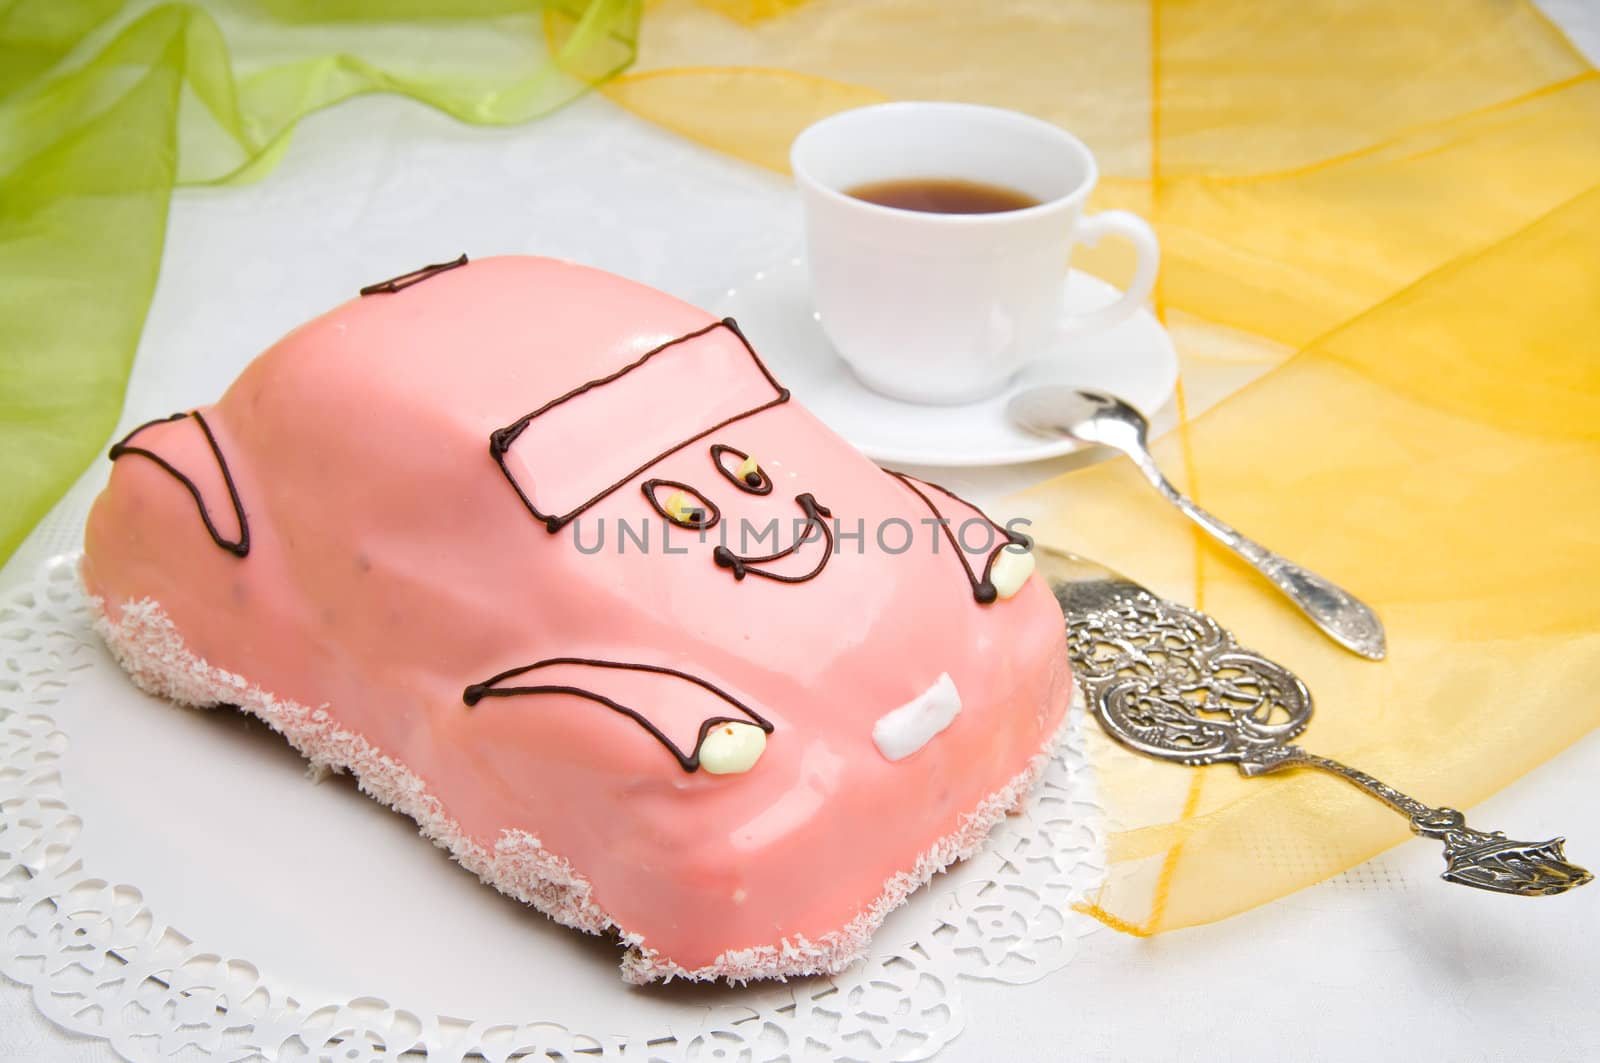 sweet and delicious cake looking like retro car